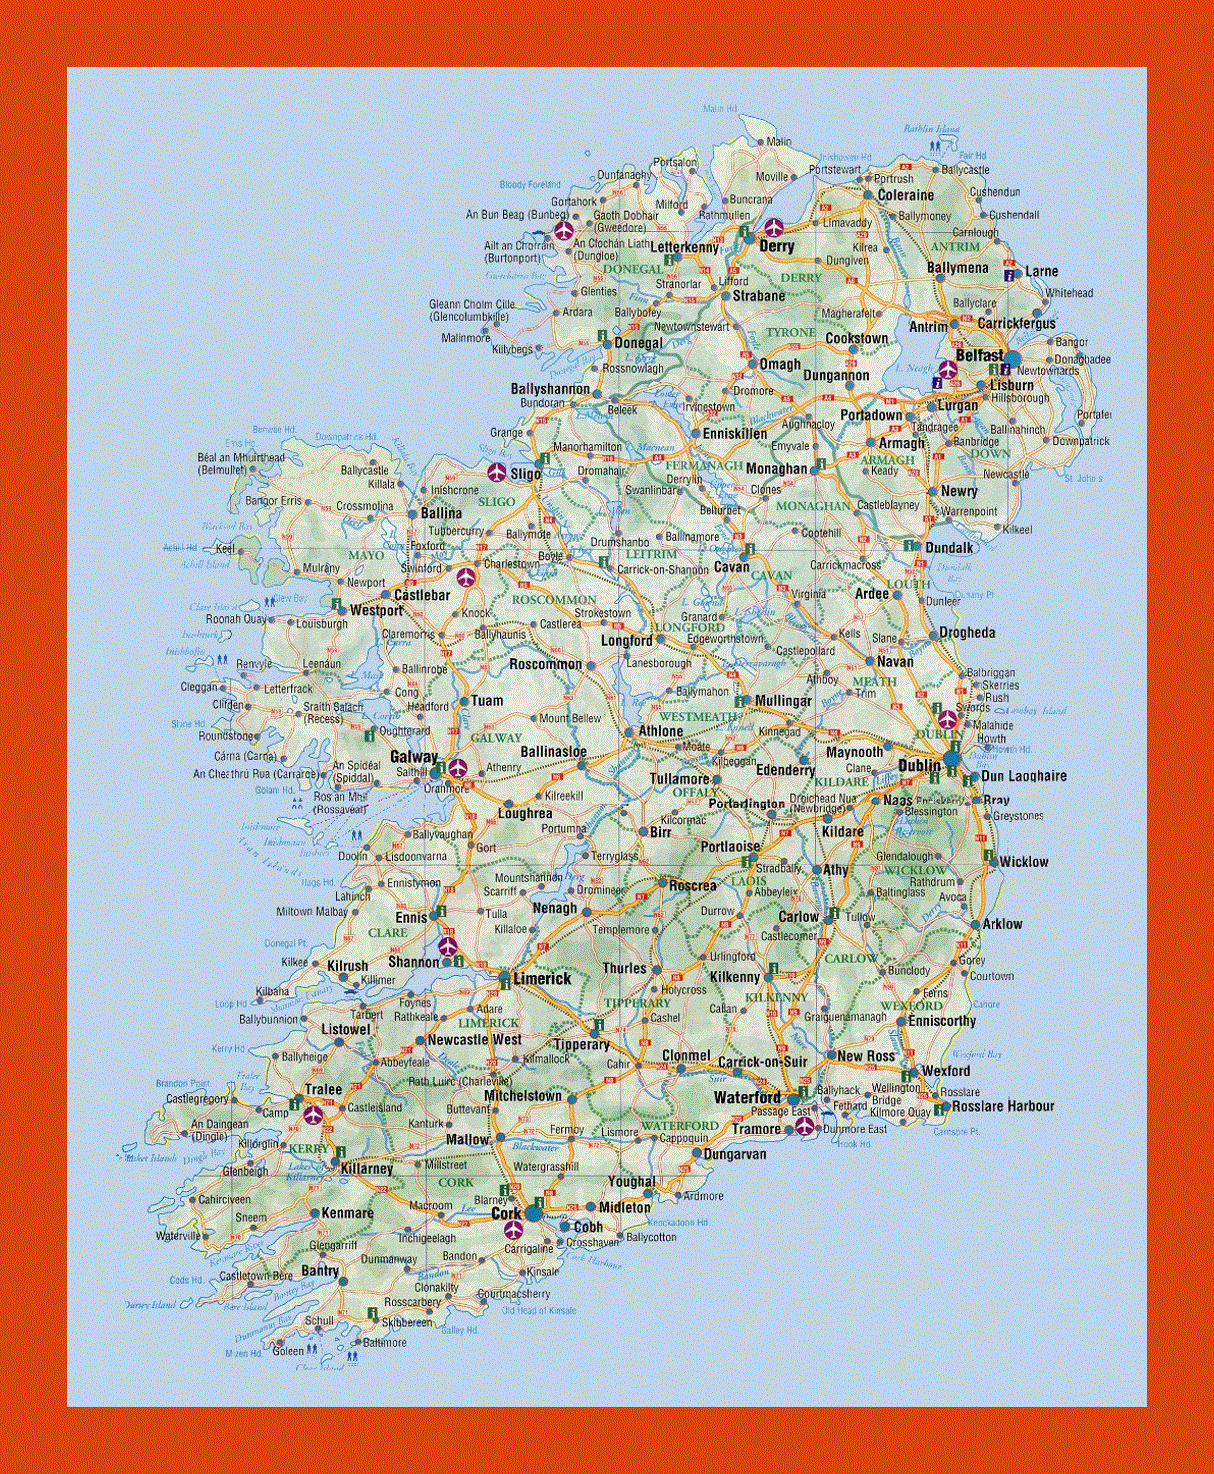 Elevation and road map of Ireland